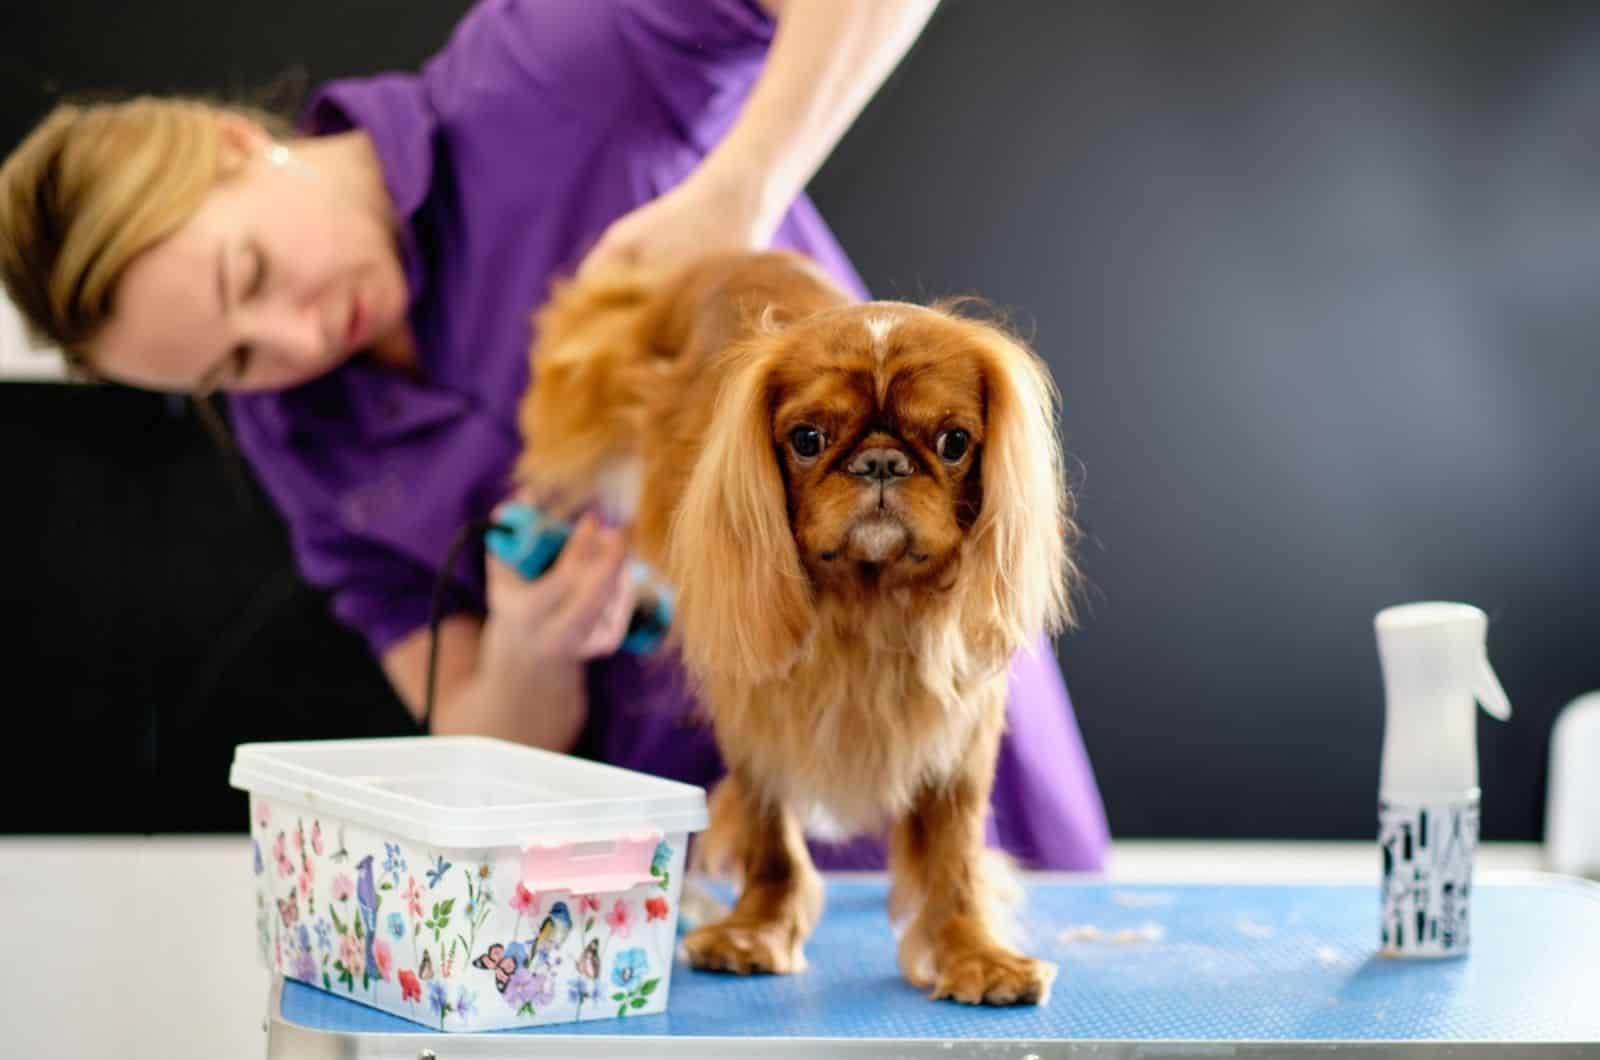 cavalier king charles spaniel during grooming at salon